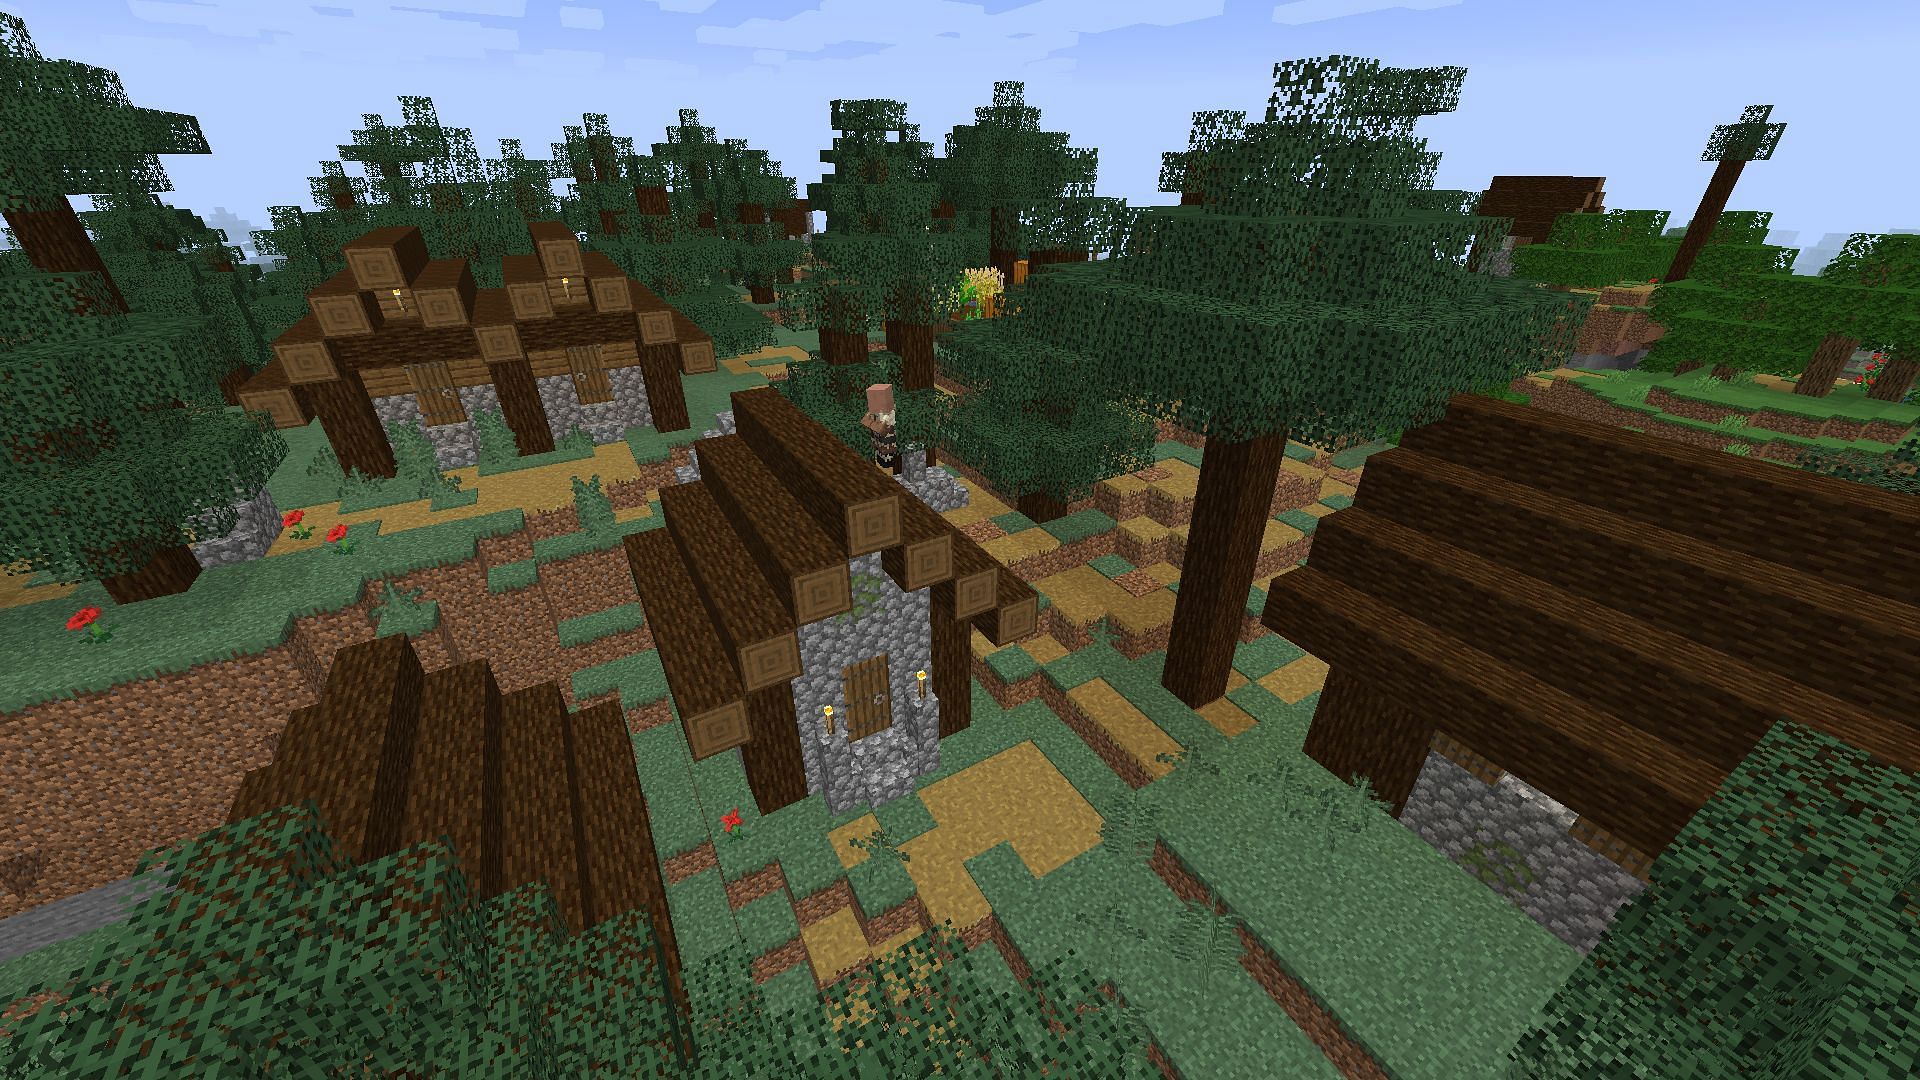 The example village with the default textures (Image via Minecraft)